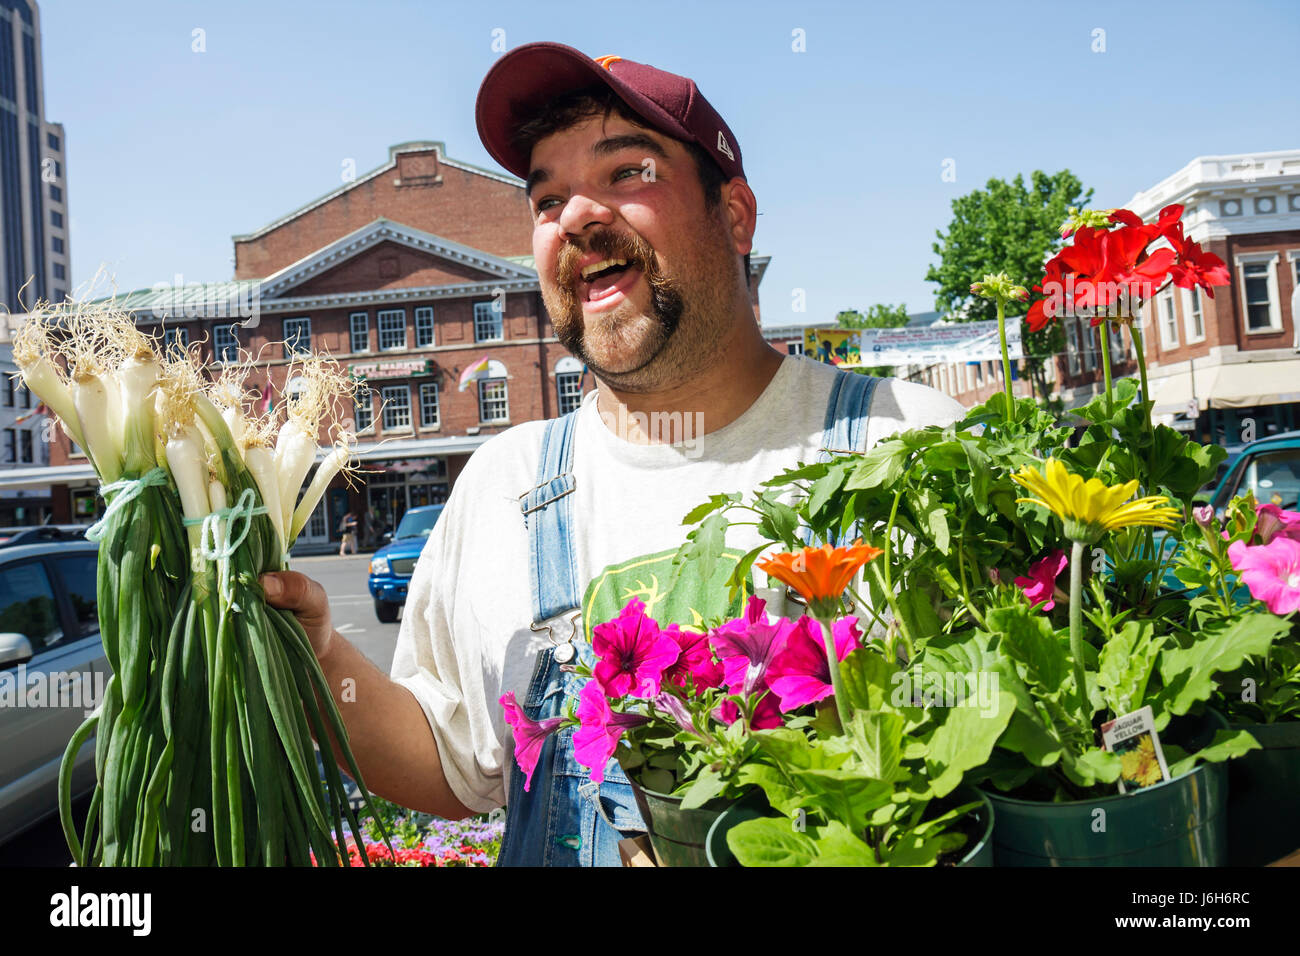 Roanoke Virginia,Market Square,Farmers' Market,man men male adult adults,local produce,vegetable,vegetables,flower,flower,plants,overalls,country,scal Stock Photo